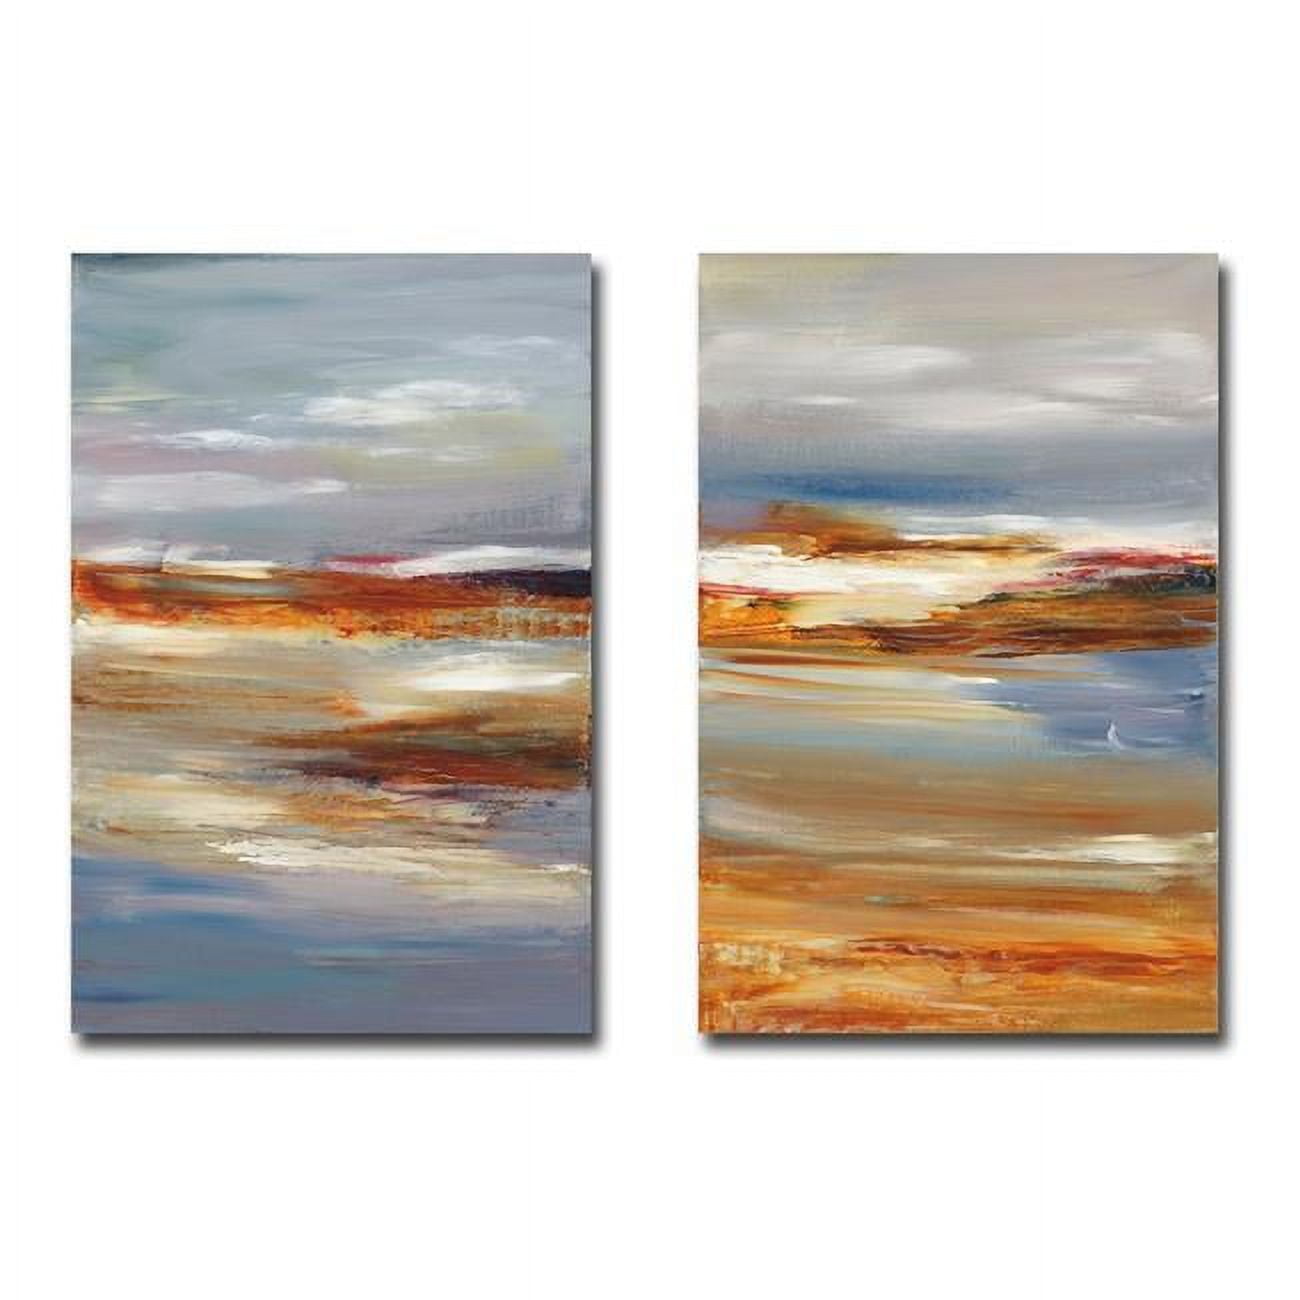 1218i781cg Fresh Aire I & Ii By Caroline Gold 2-piece Premium Gallery-wrapped Canvas Giclee Art Set - 12 X 18 X 1.5 In.